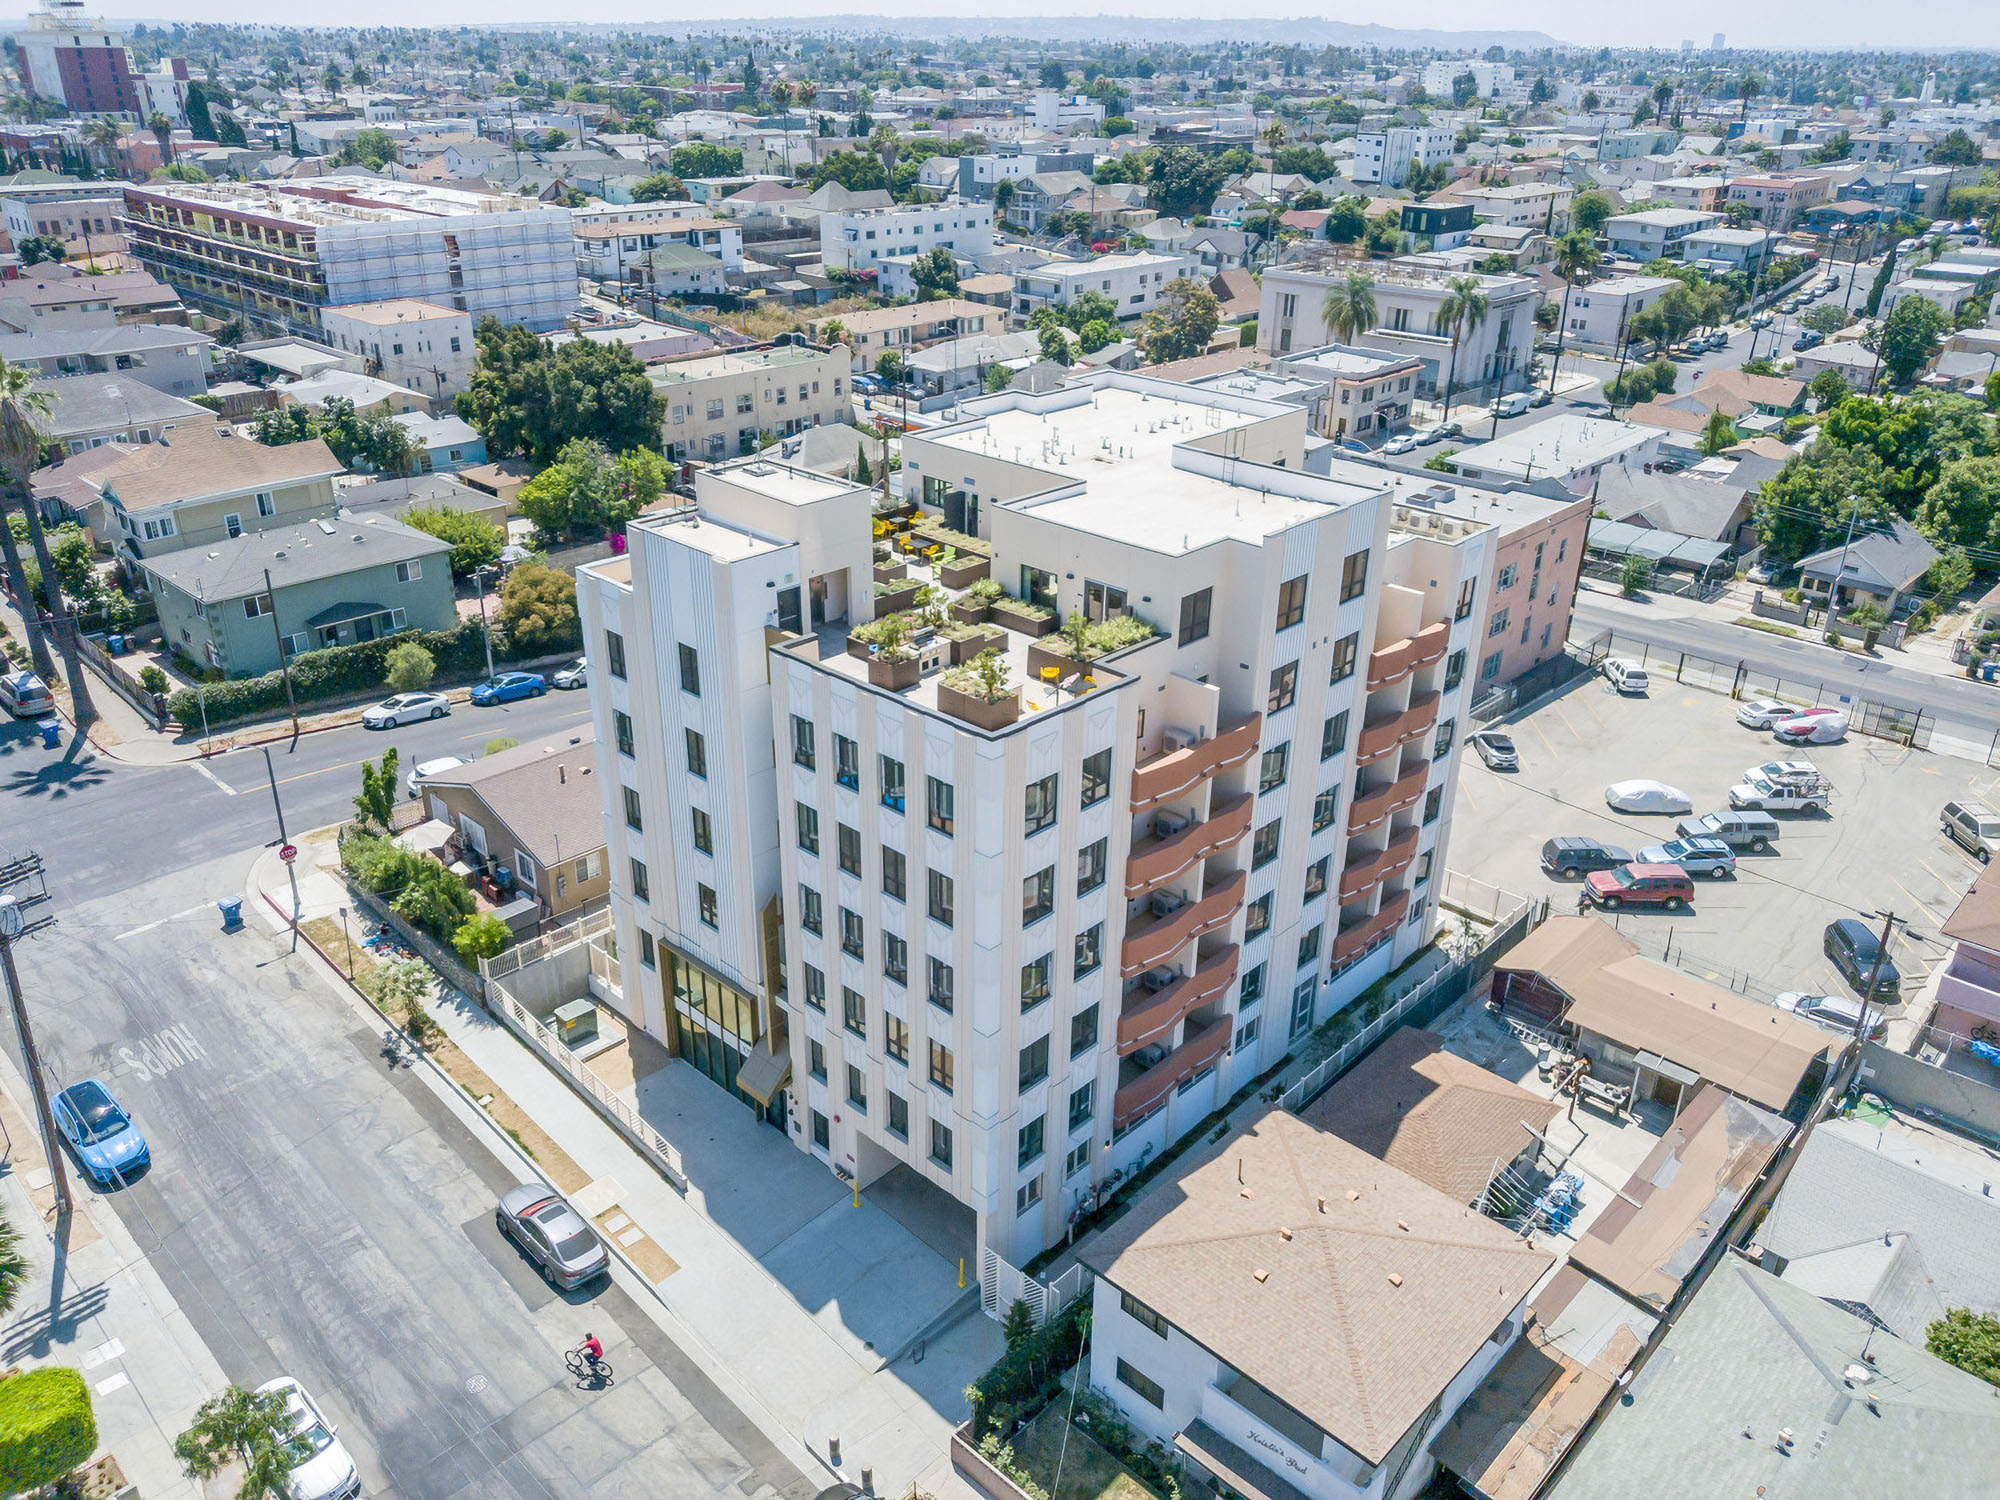 Affordable housing project complete in Los Angeles